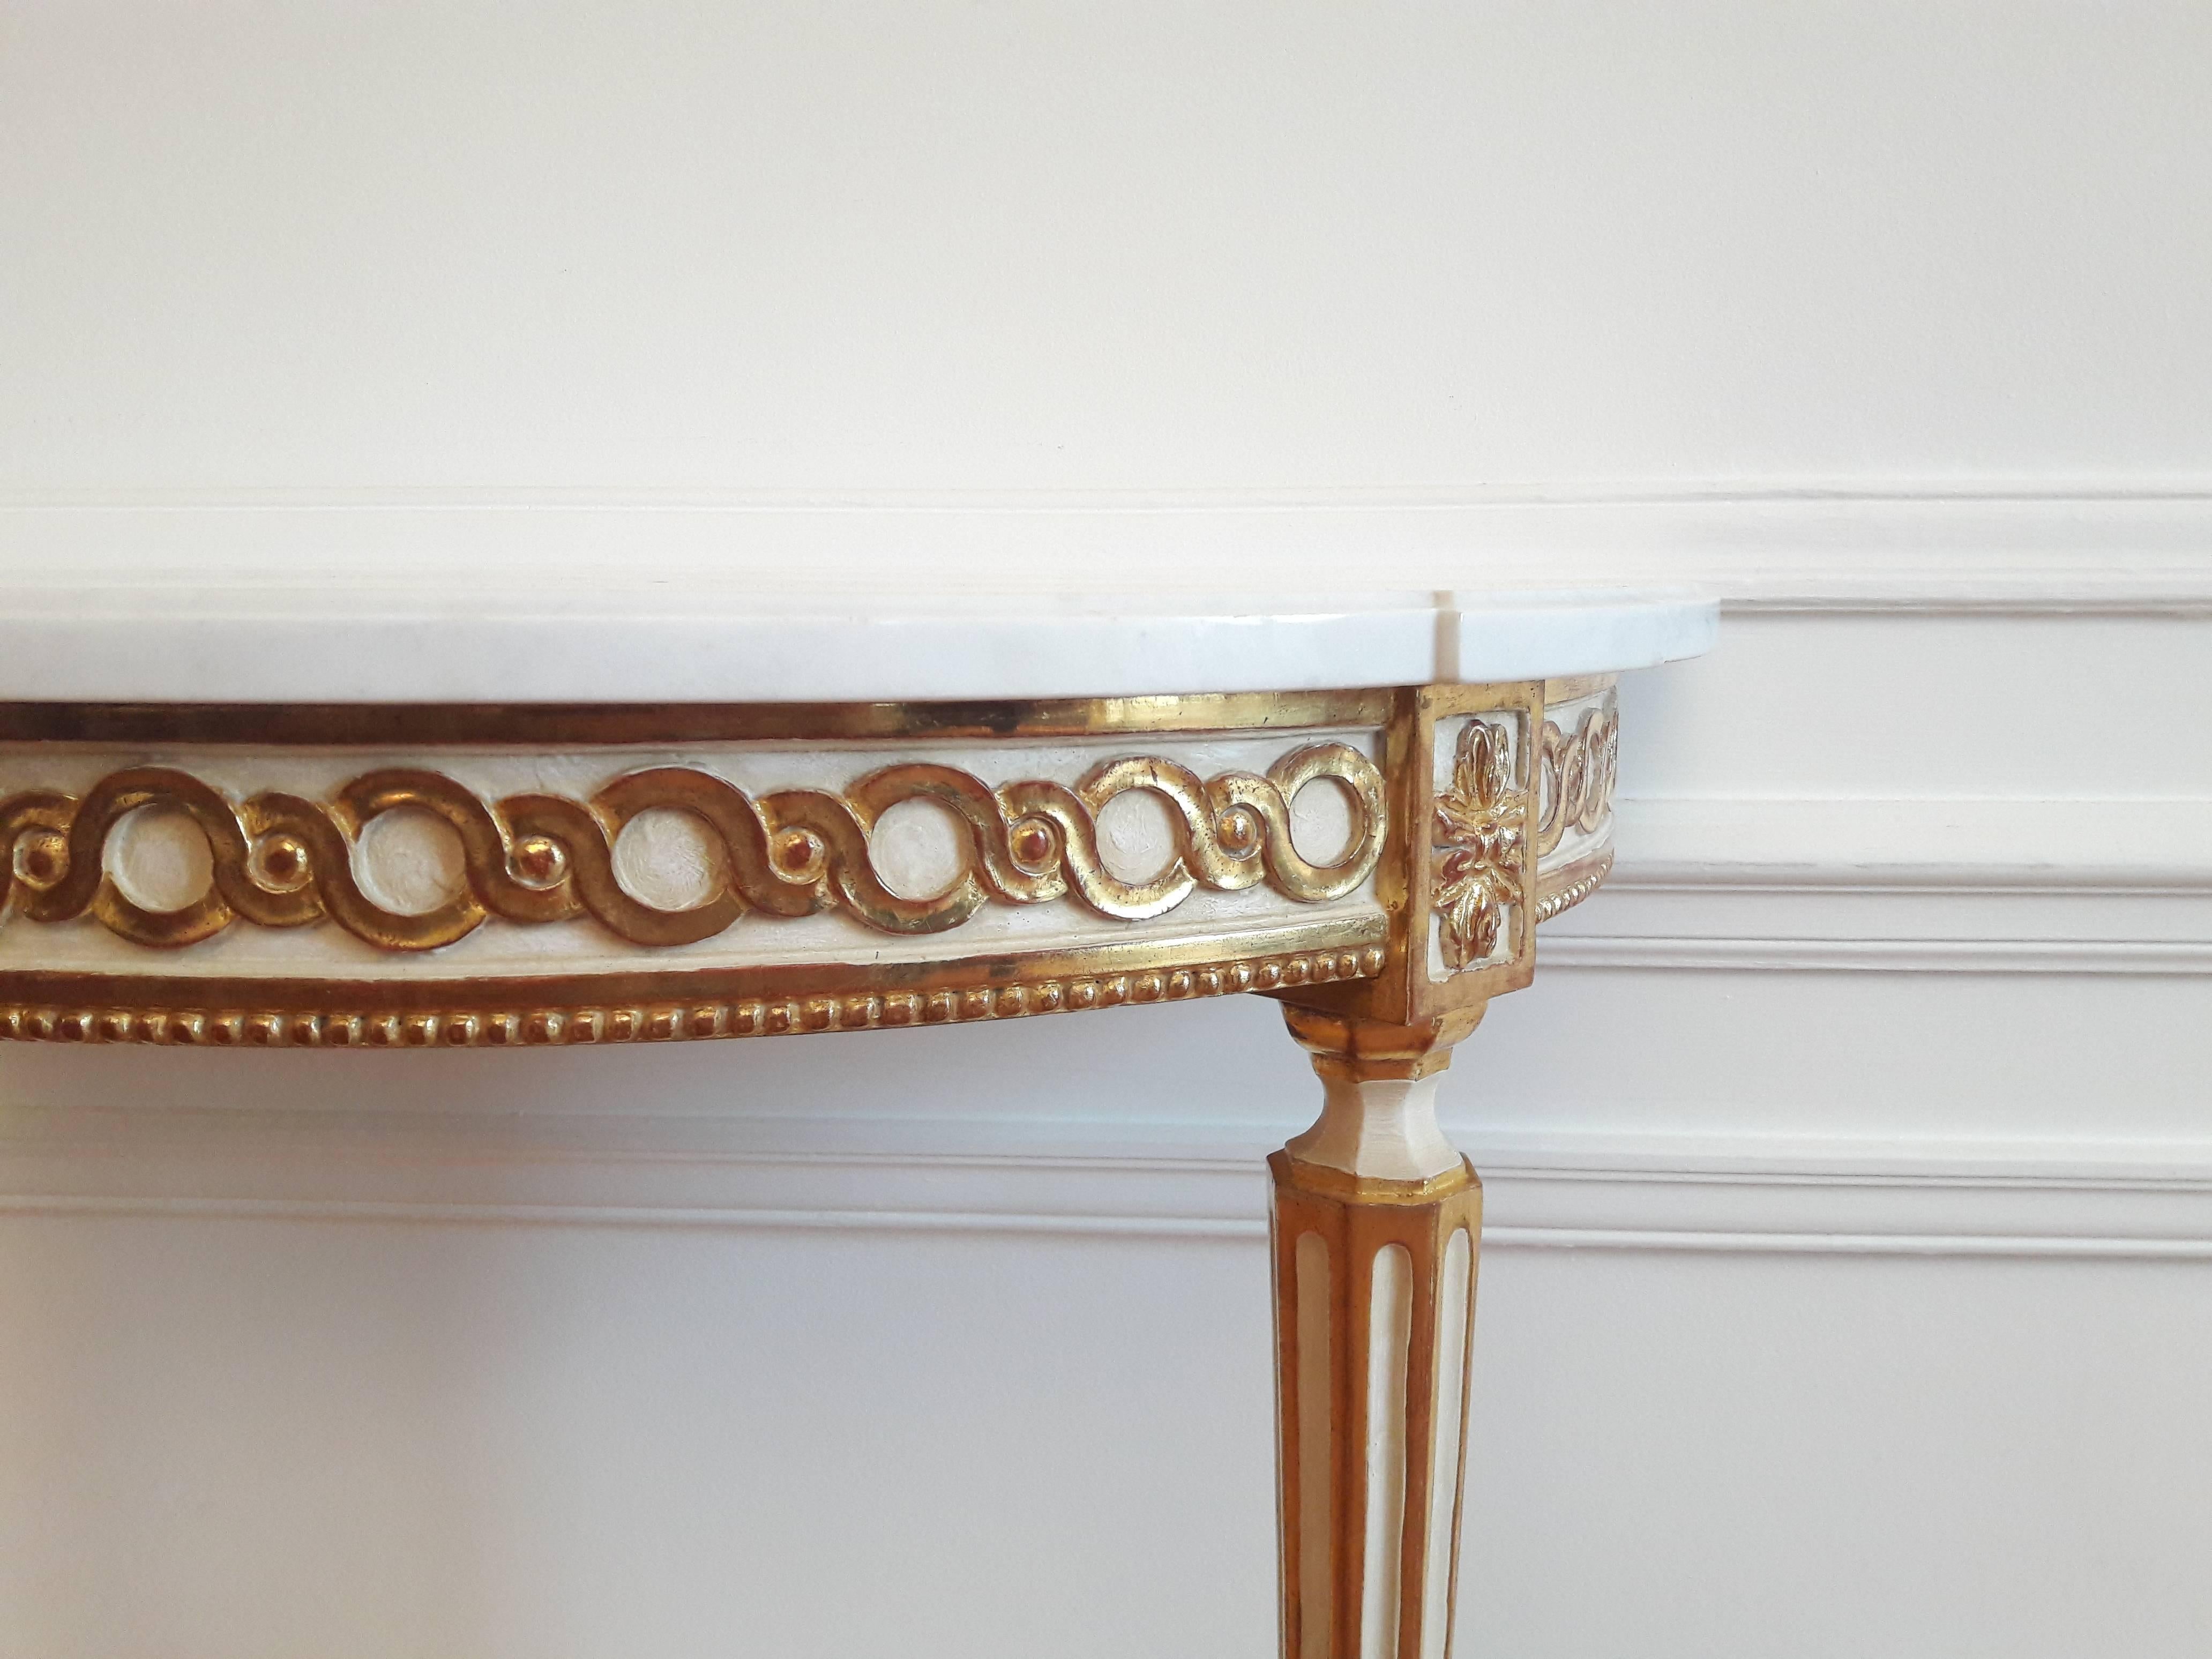 Console antique de style Louis XVI and golden leaf, topped with a white demilune marble Carrara.
The feet are fluted and carved, decorated with gold leaf on all sides.
The console rests on two feet and is to fix on the wall.